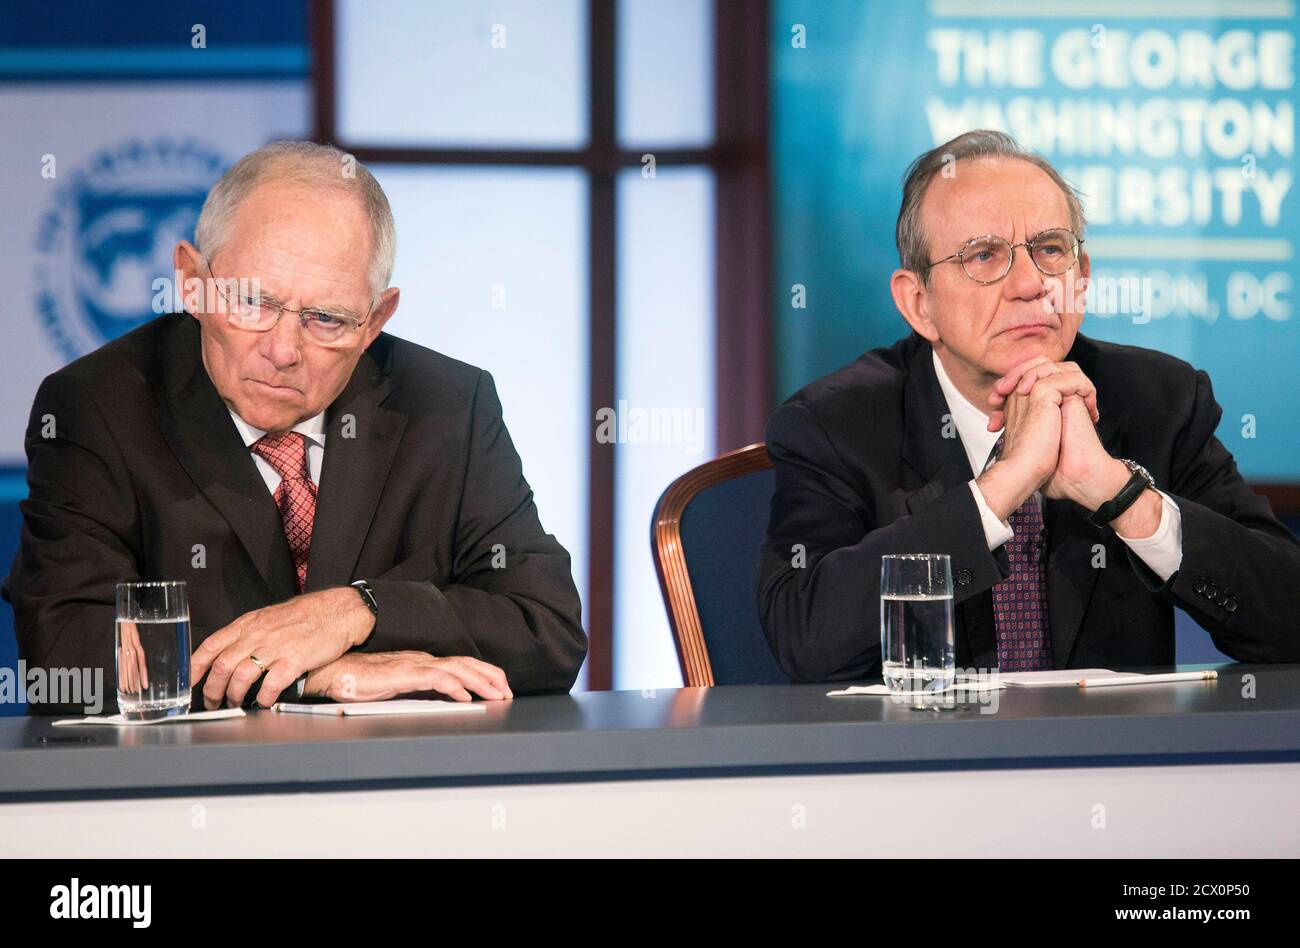 Germany's Minister of Finance Wolfgang Schauble (L) and Italy's Minister of Economy and Finance Pier Carlo Padoan participate in a discussion on 'A Reform Agenda for Europe's Leaders' during the World Bank/IMF annual meetings in Washington October 9, 2014.      REUTERS/Joshua Roberts    (UNITED STATES - Tags: POLITICS BUSINESS) Stock Photo